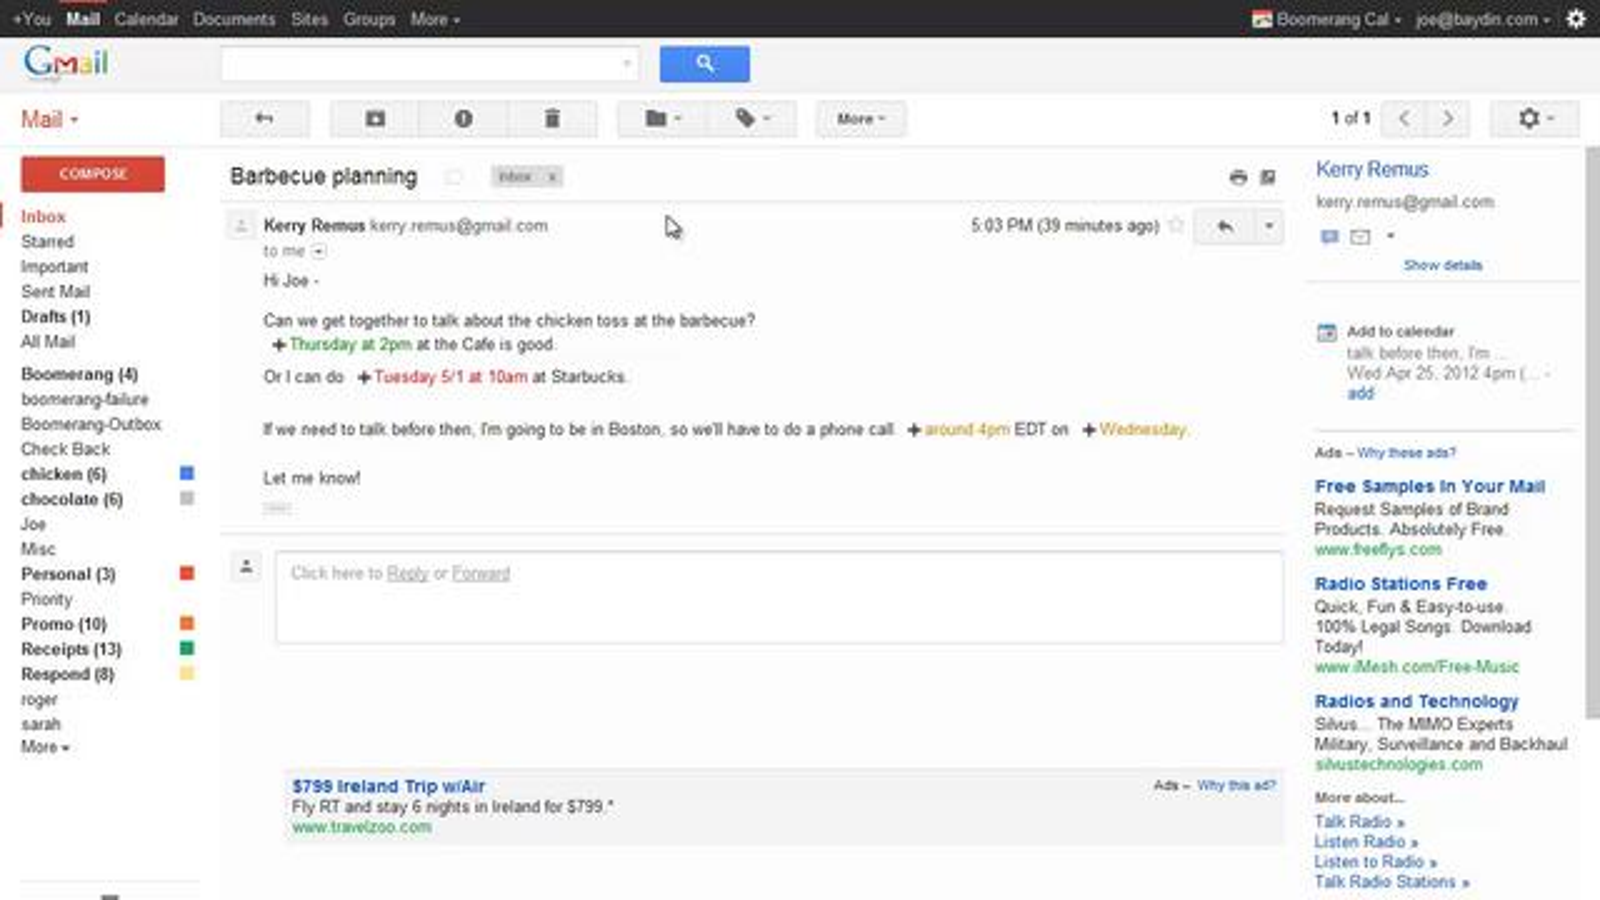 boomerang for gmail javascript enabled